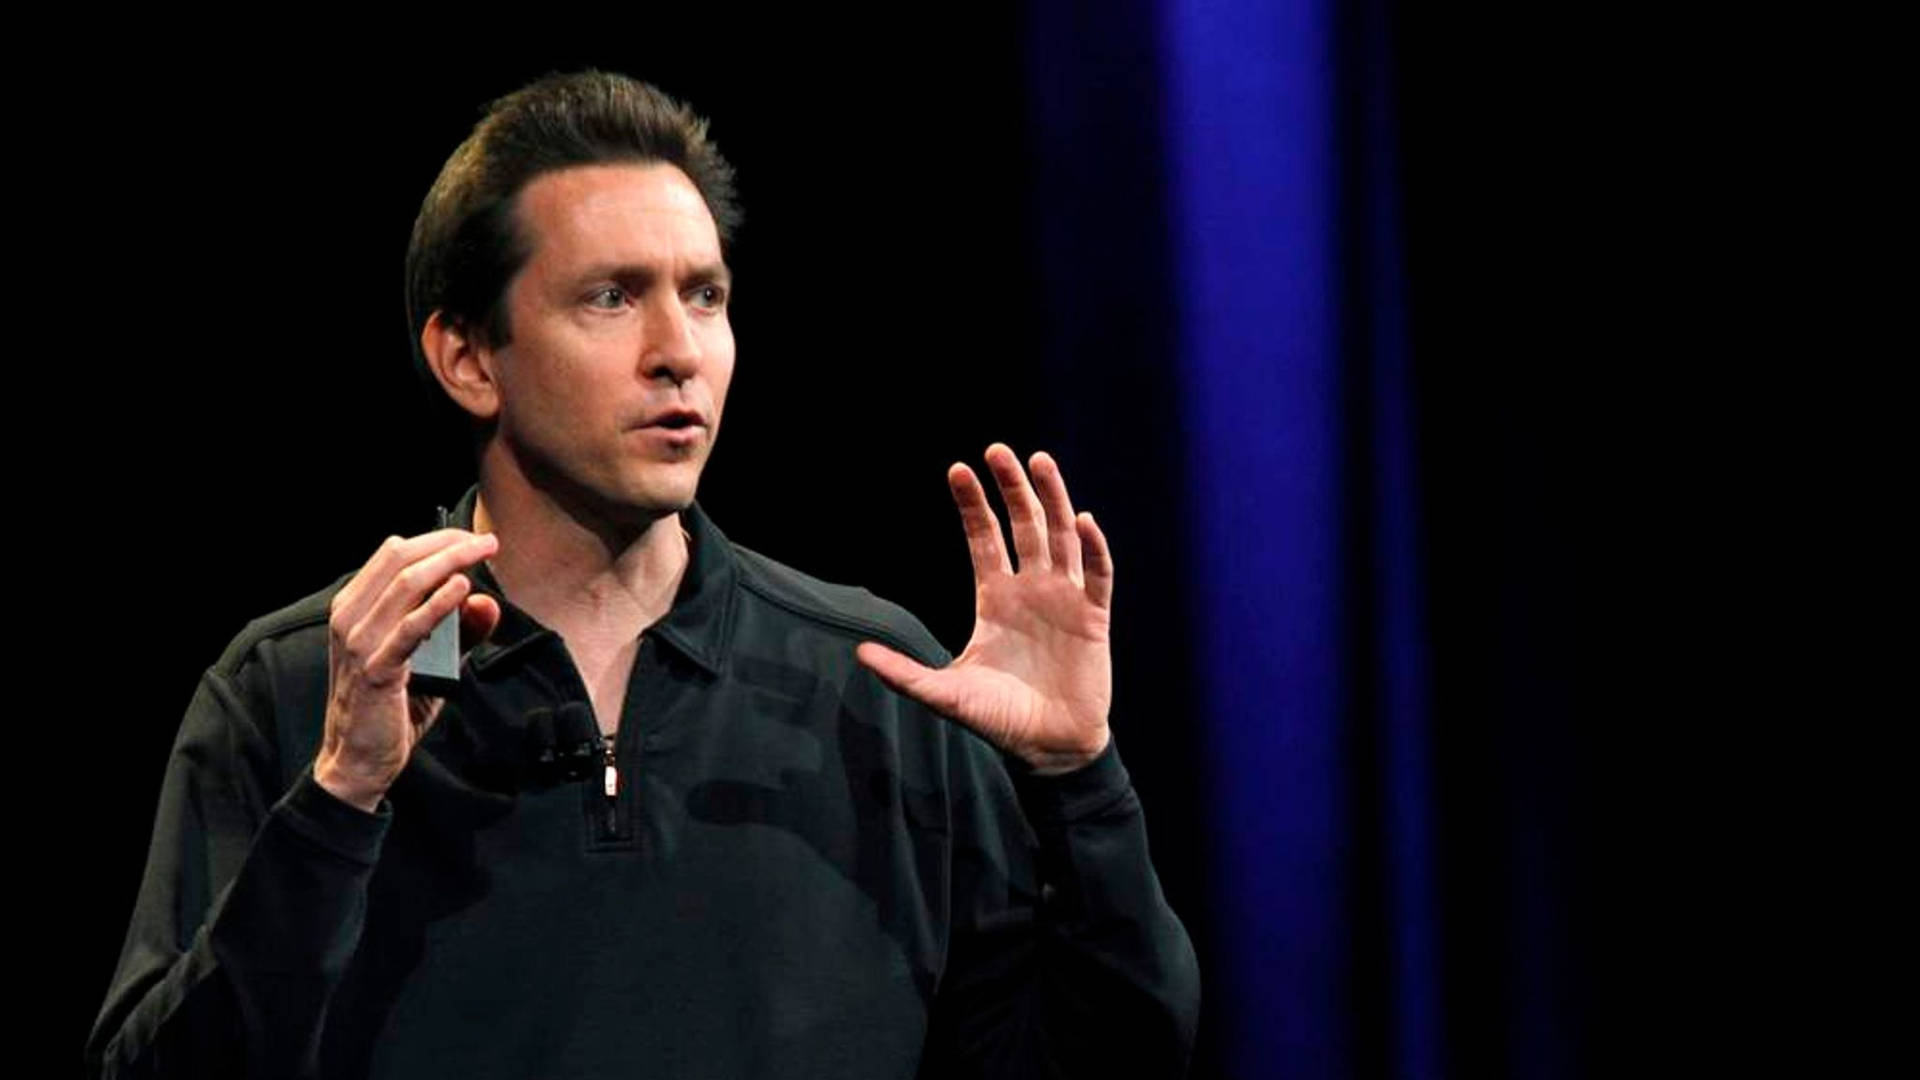 Scott Forstall Gesturing With His Hands Background